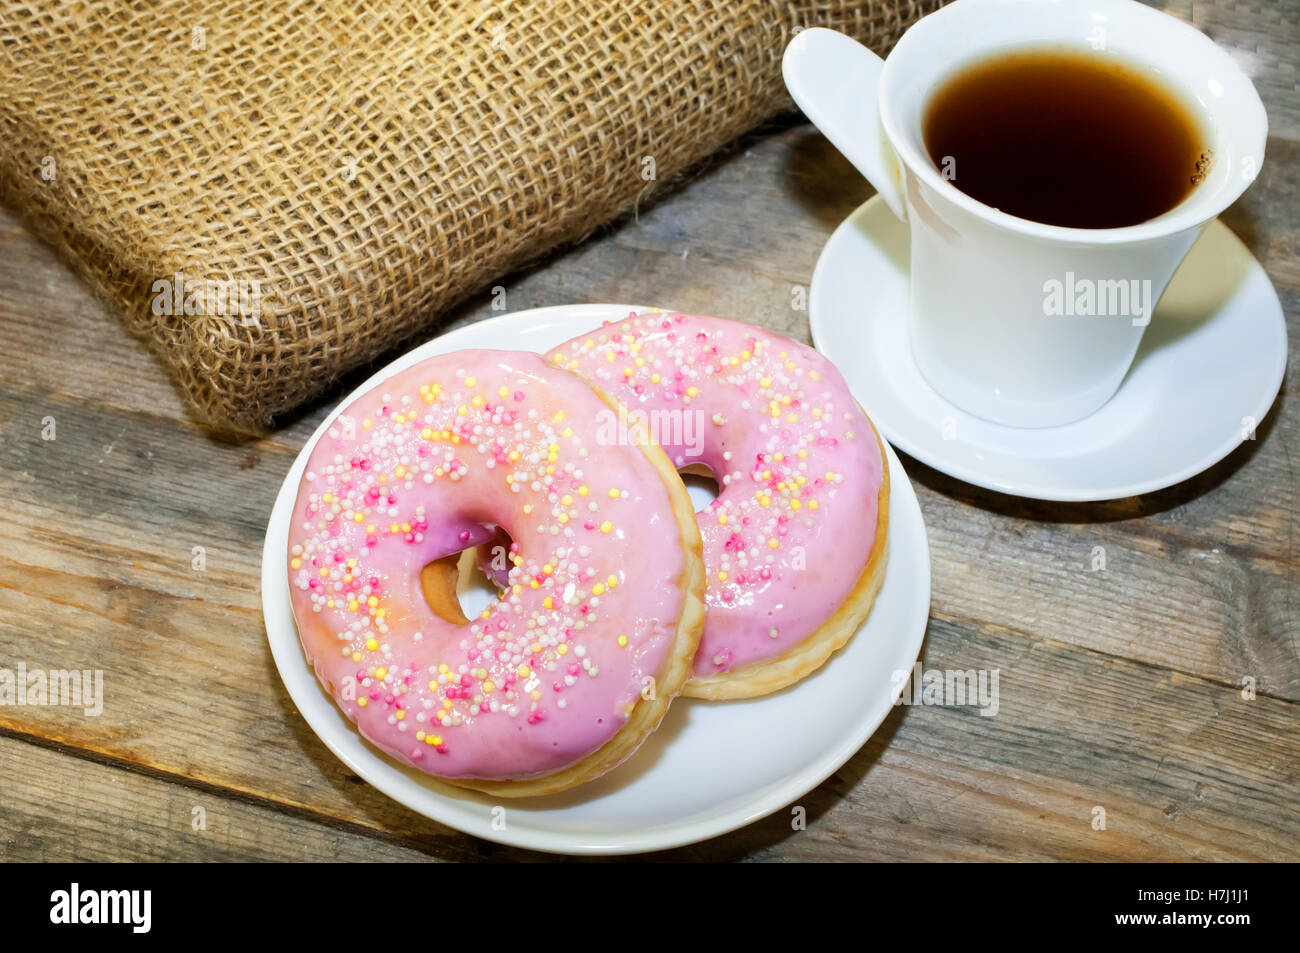 Sweet donut with pink frosting and sprinkles Stock Photo